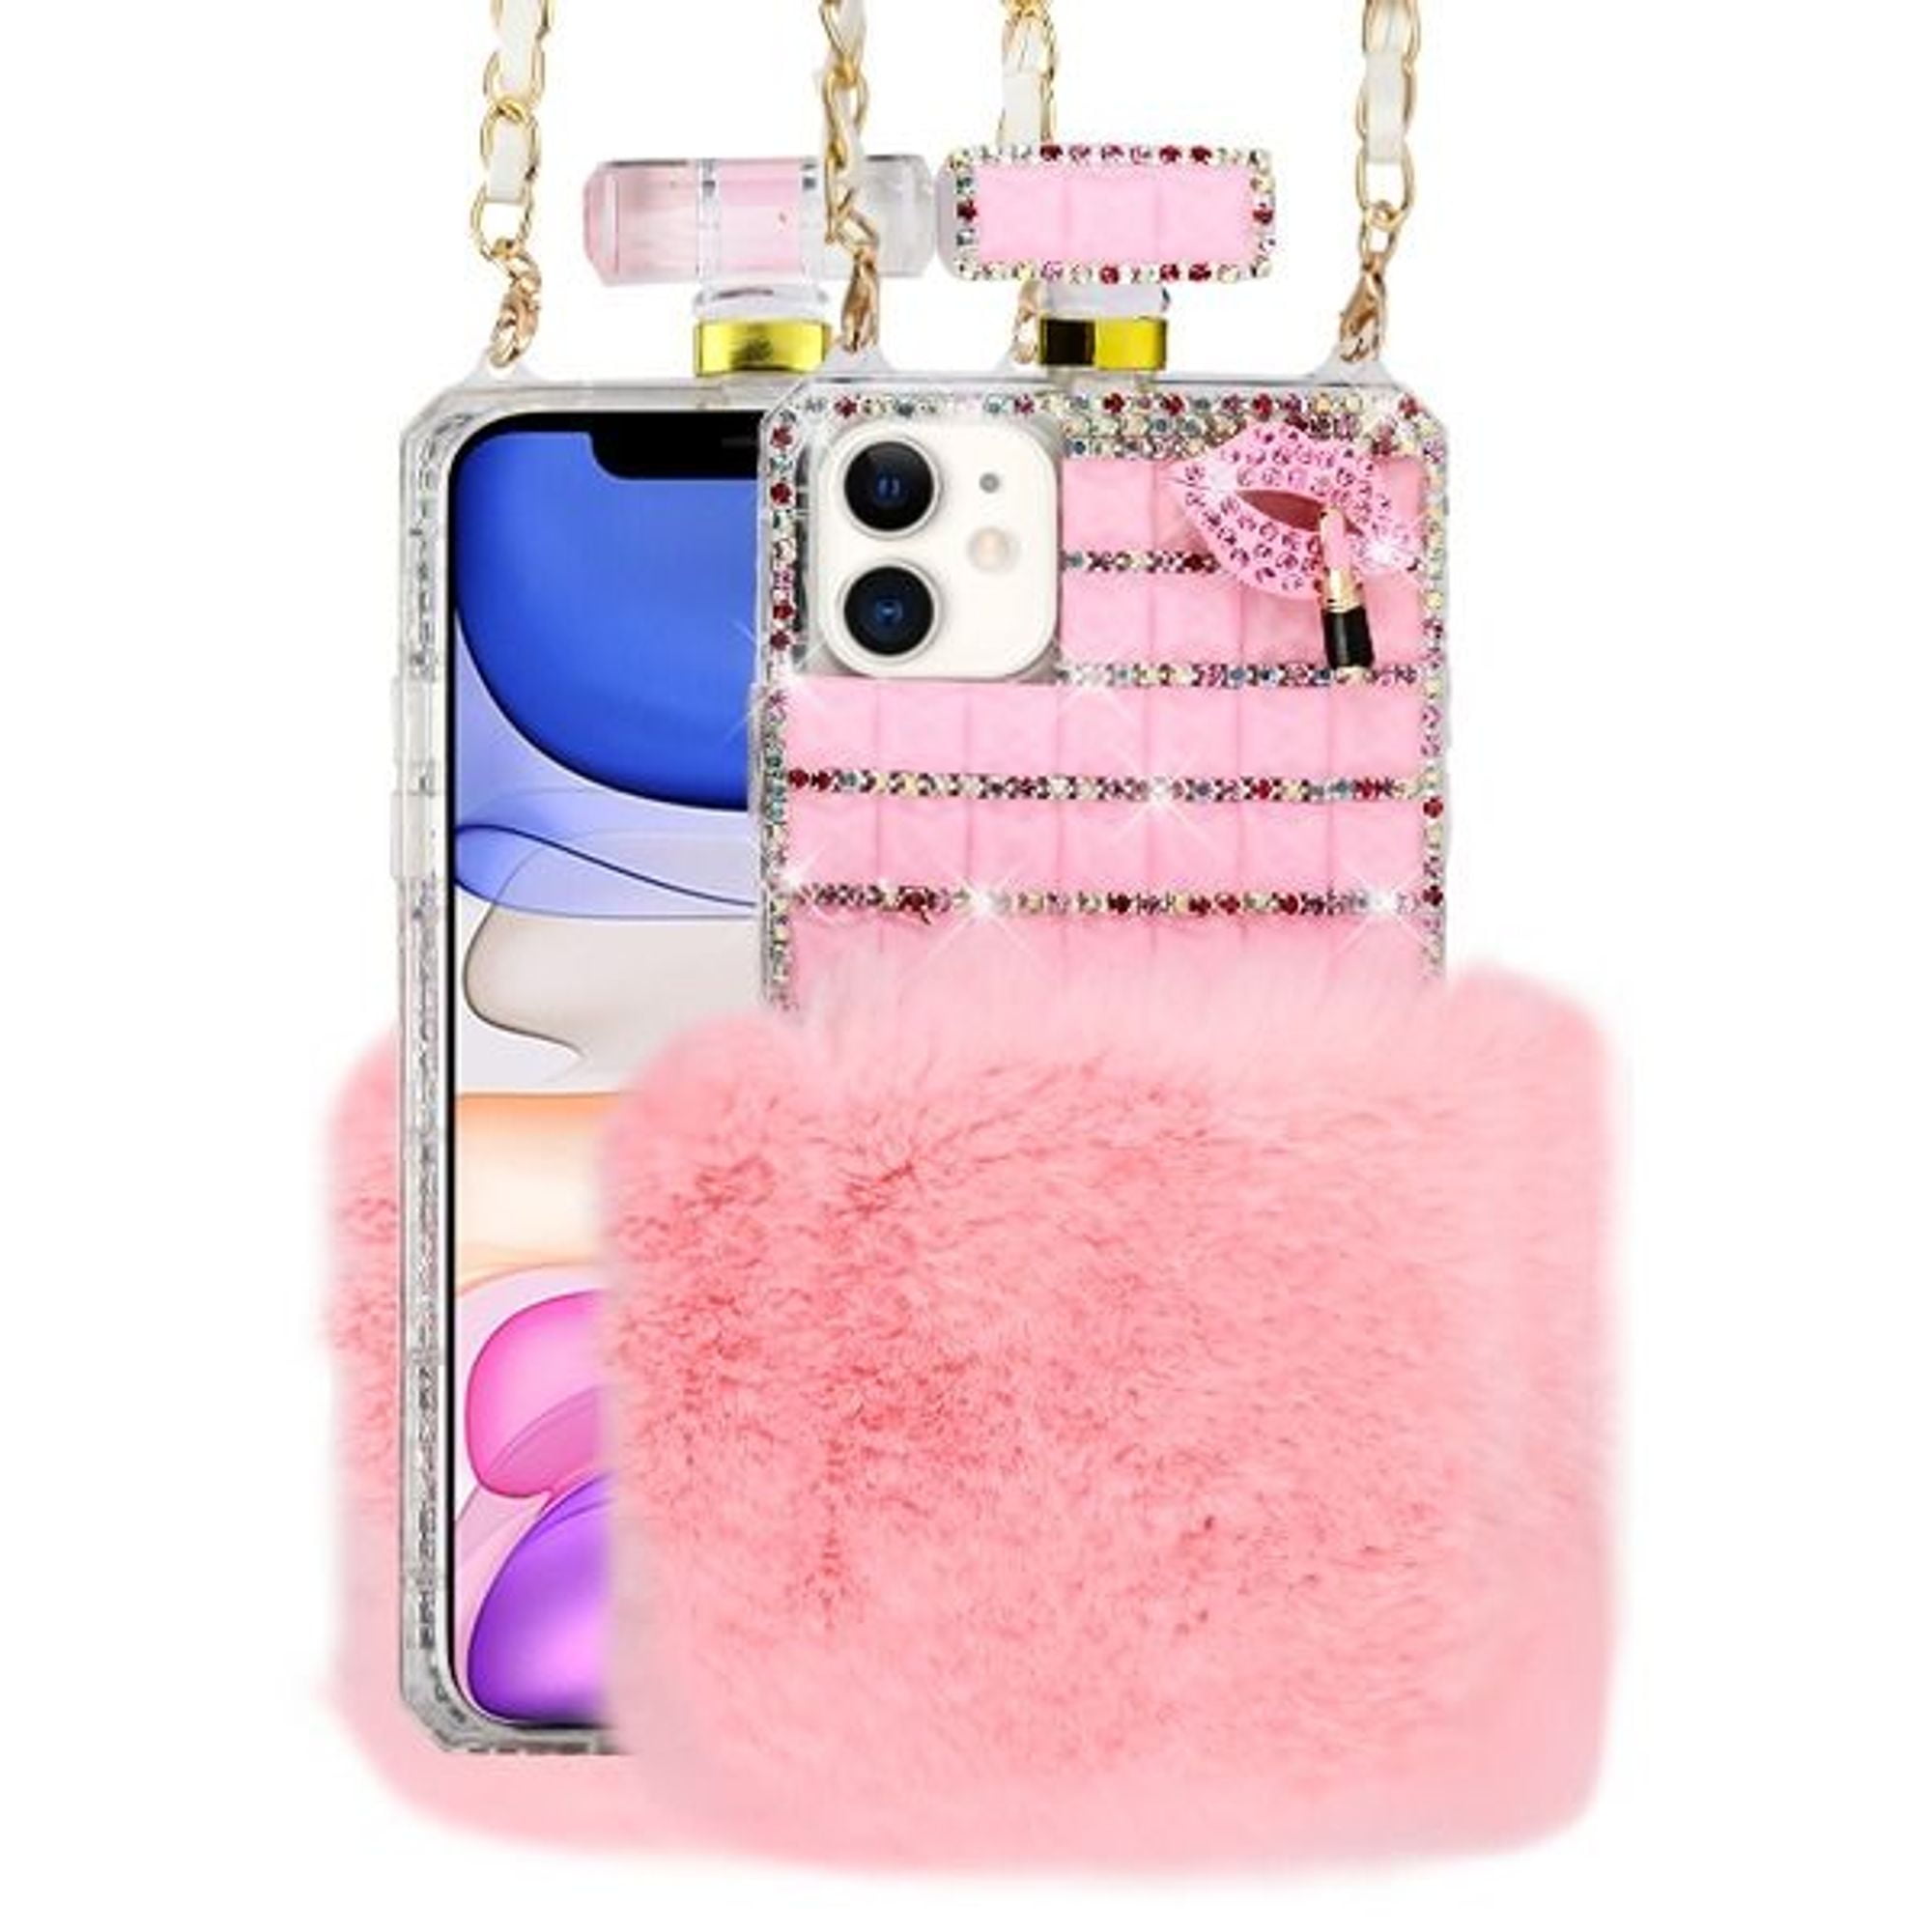 For Apple Iphone 11 Case By Insten Cute Plush With Chain Perfume Bottle Hard Snap In W Diamond Compatible Apple Iphone 11 Walmart Com Walmart Com